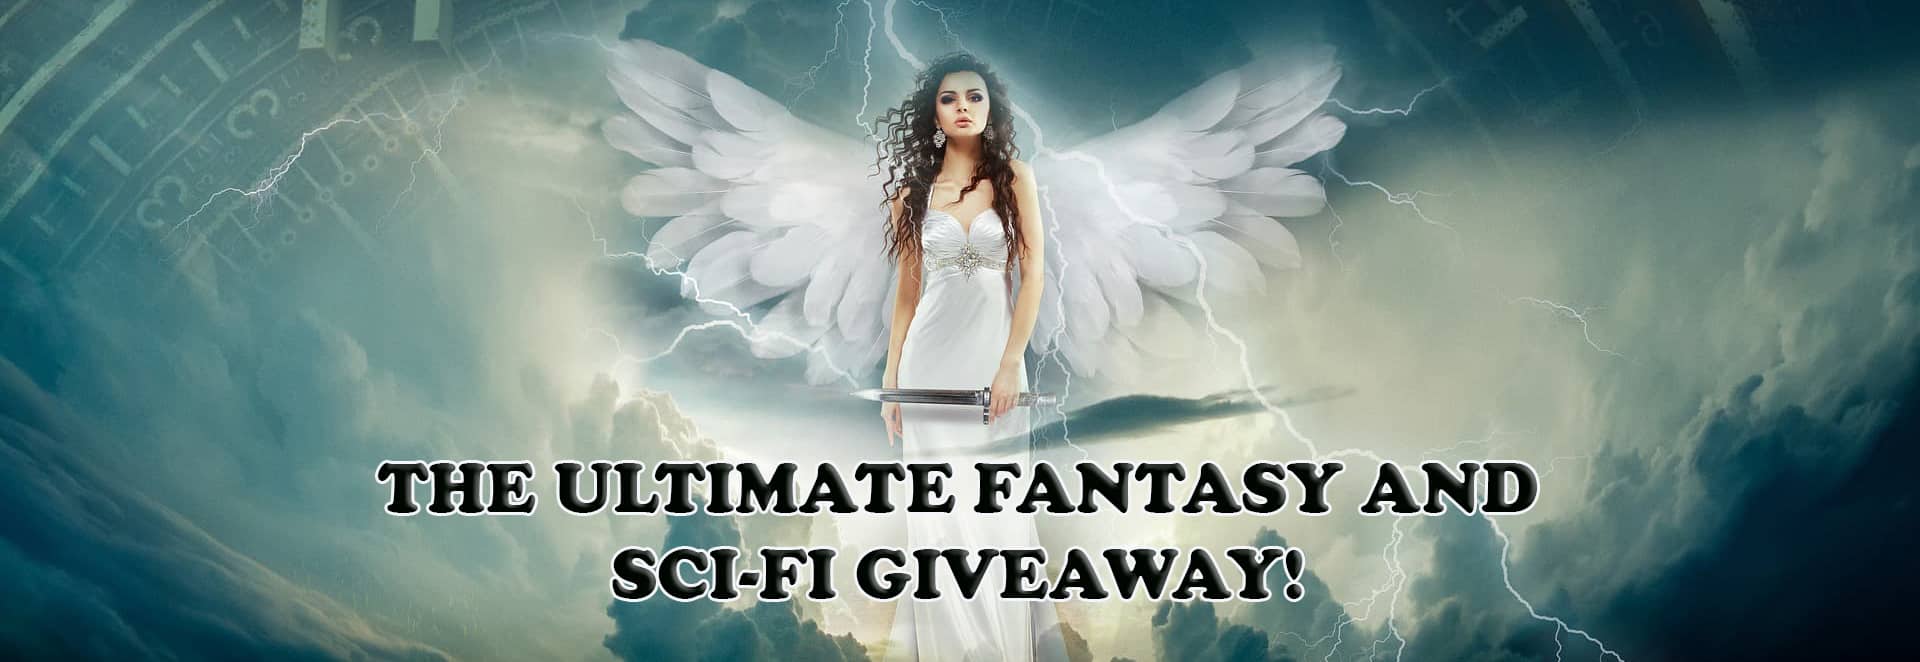 Ultimate Fantasy and Sci-Fi Giveaway!